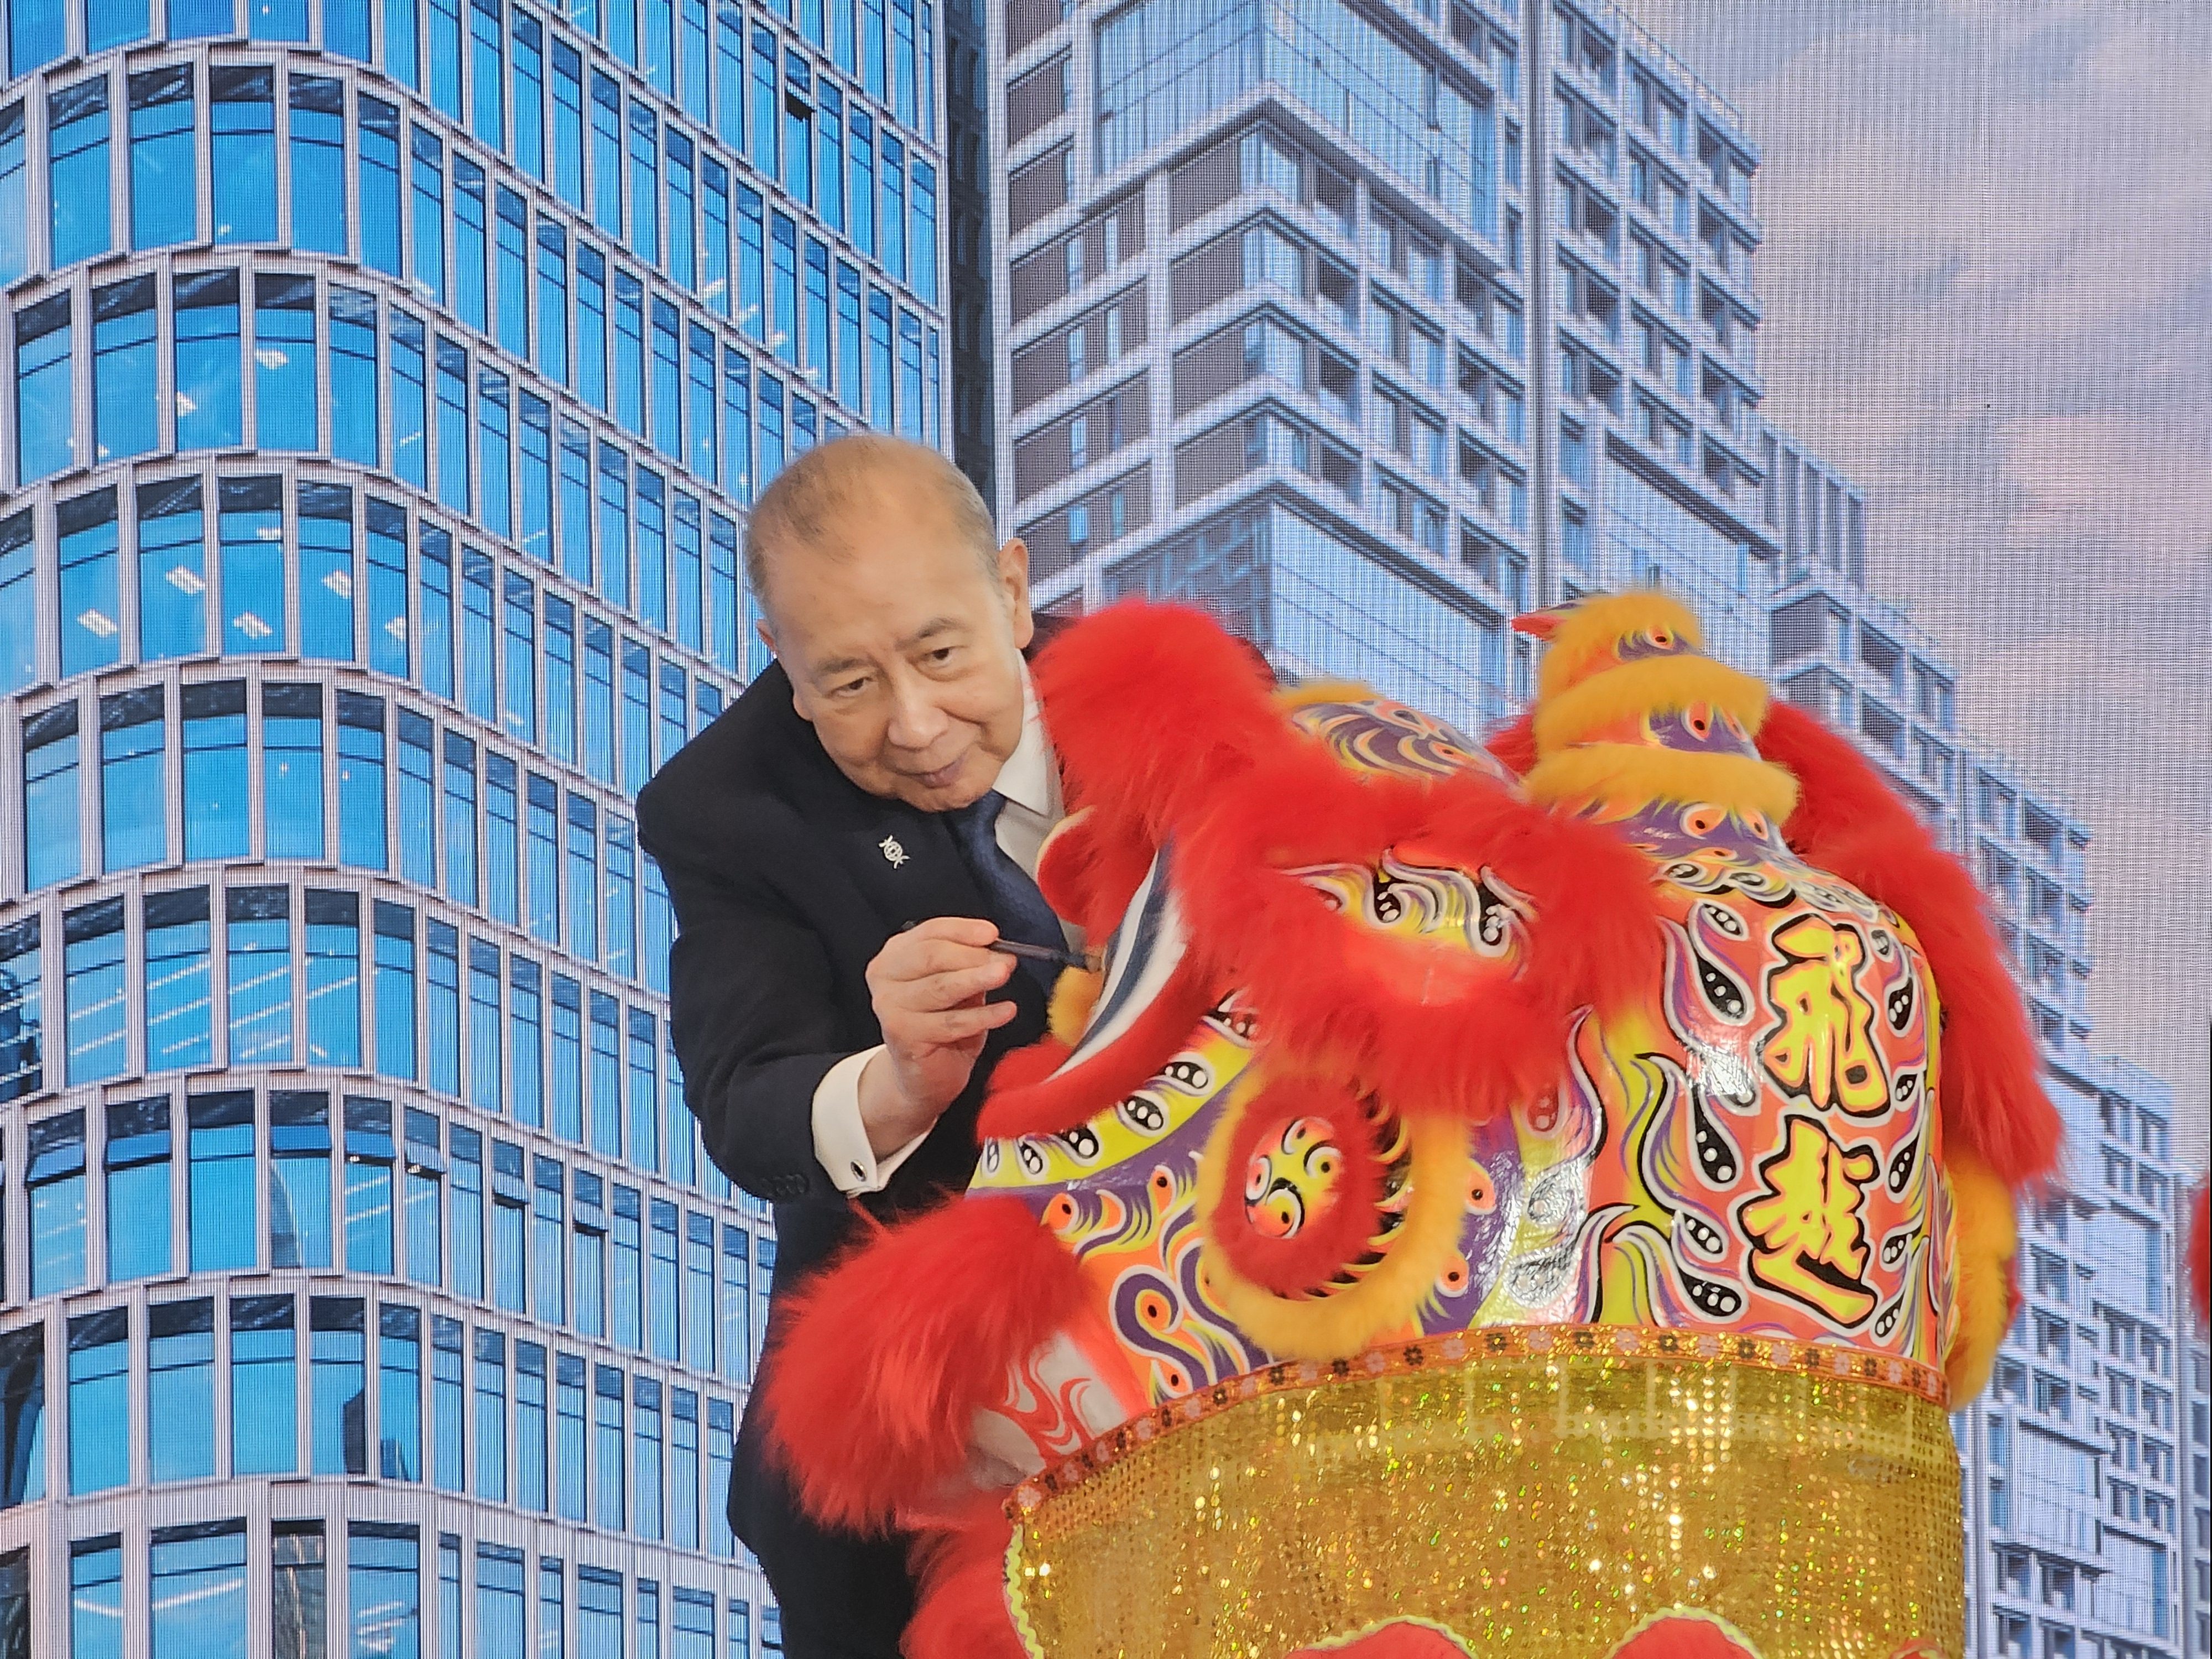 Bank of East Asia executive chairman David Li dots the eye of a lion before the ceremonial lion dance at the inauguration of the BEA Tower in Qianhai, Shenzhen, on Friday. Photo: Enoch Yiu